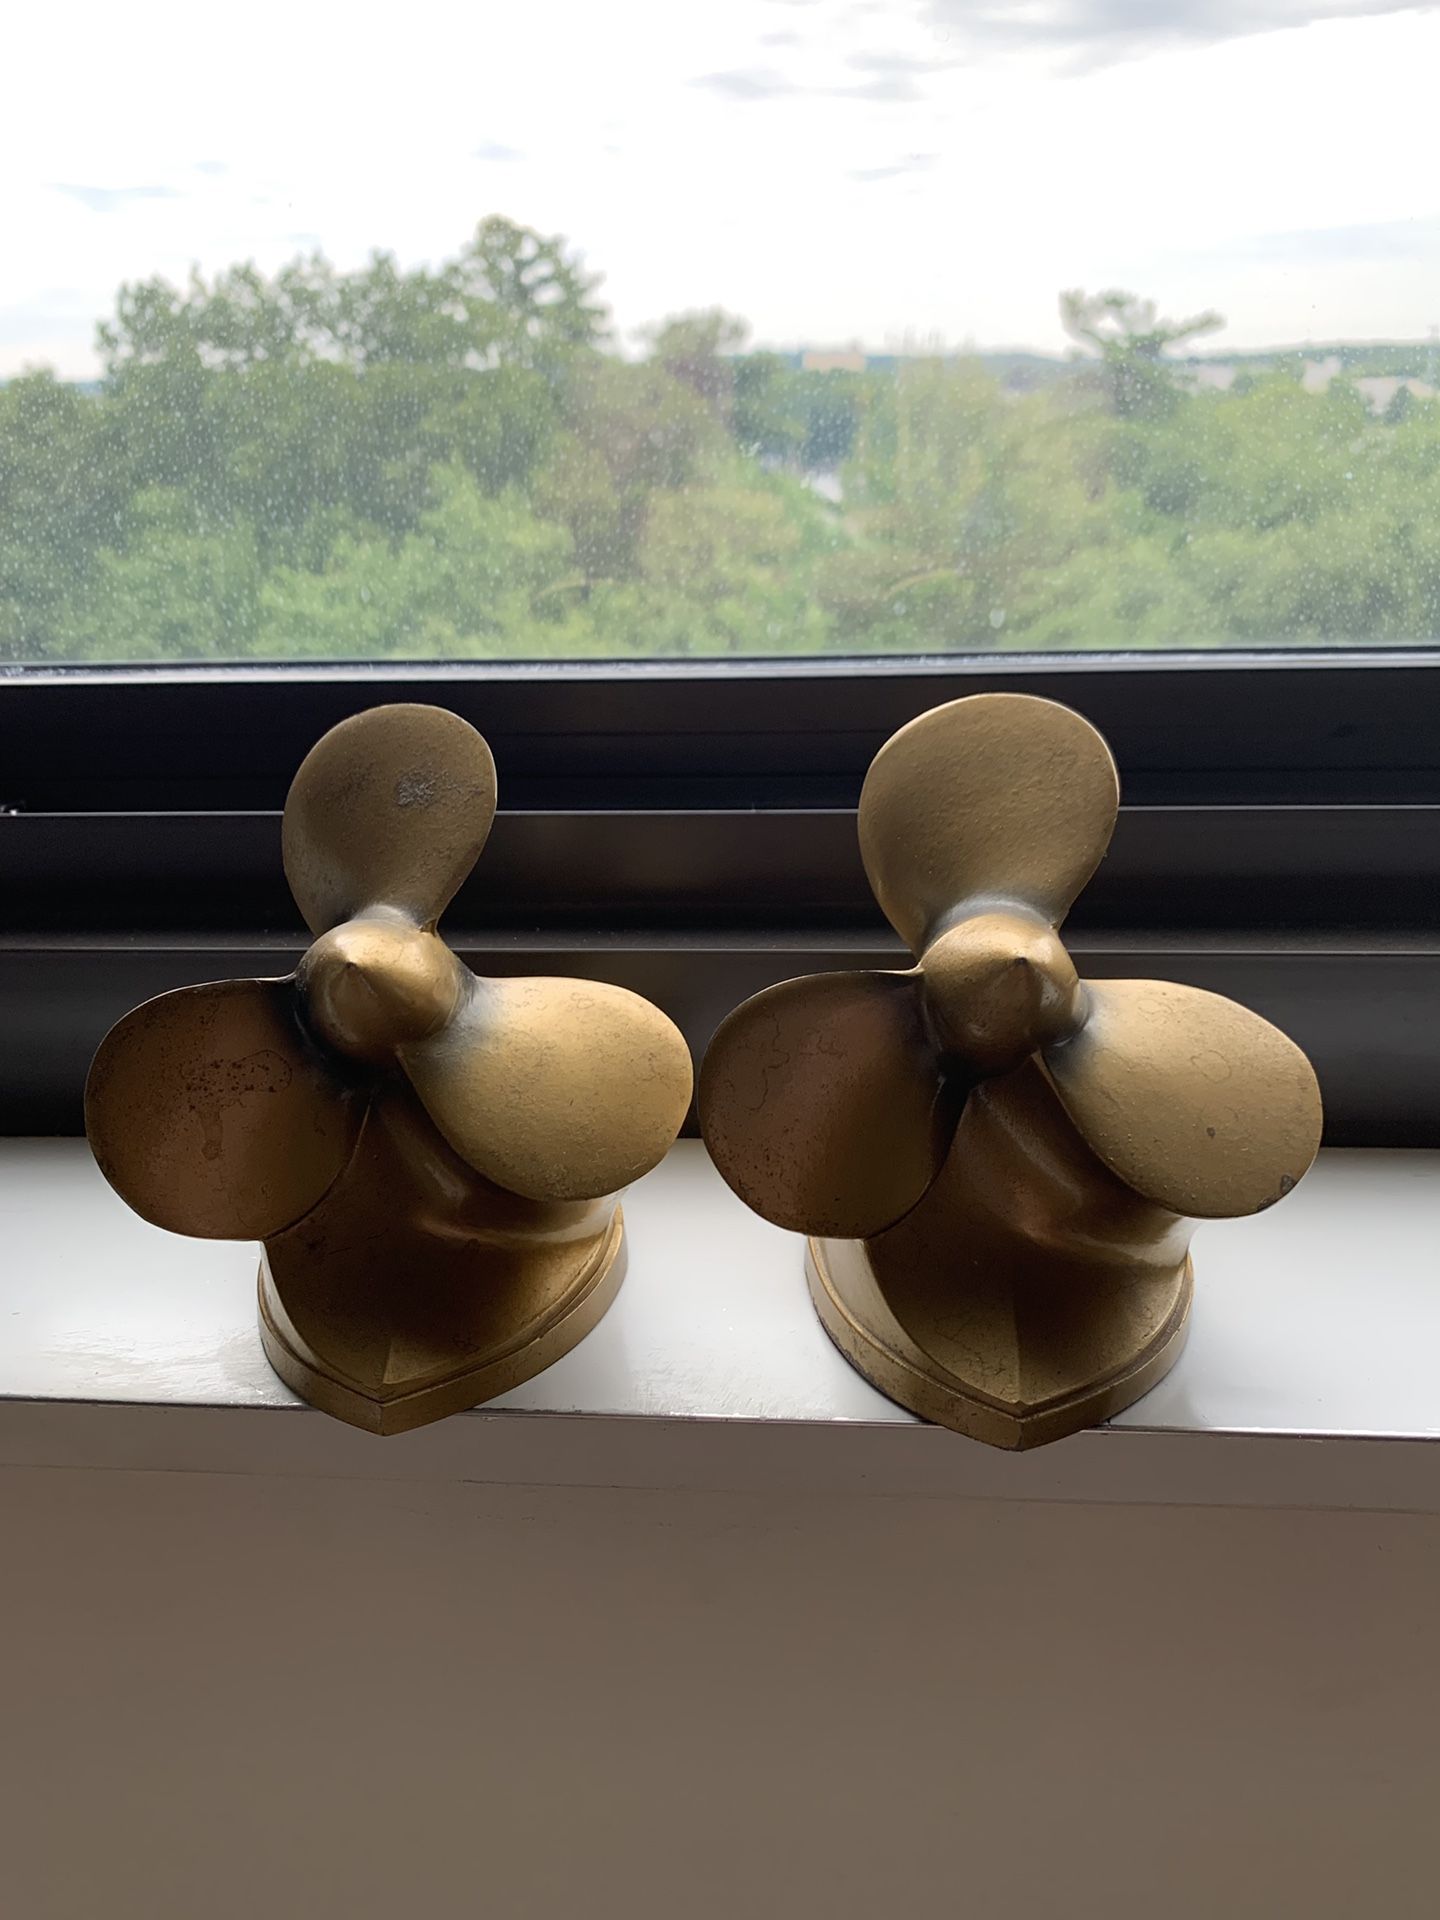 PM CRAFTSMAN PROPELLOR BOOKENDS